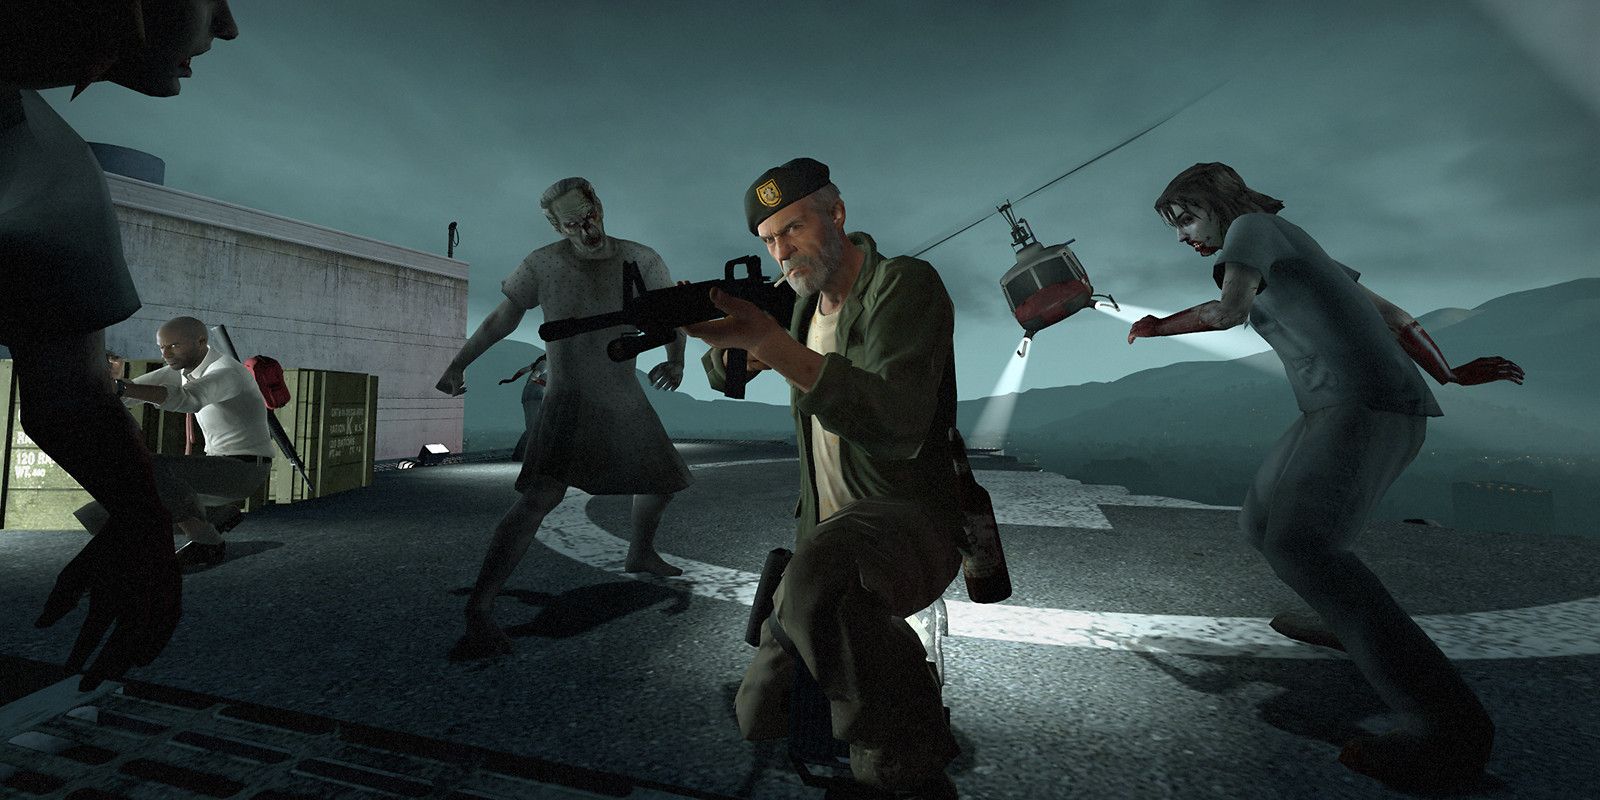 The characters from Left 4 Dead taking on zombies as a helicopter arrives.